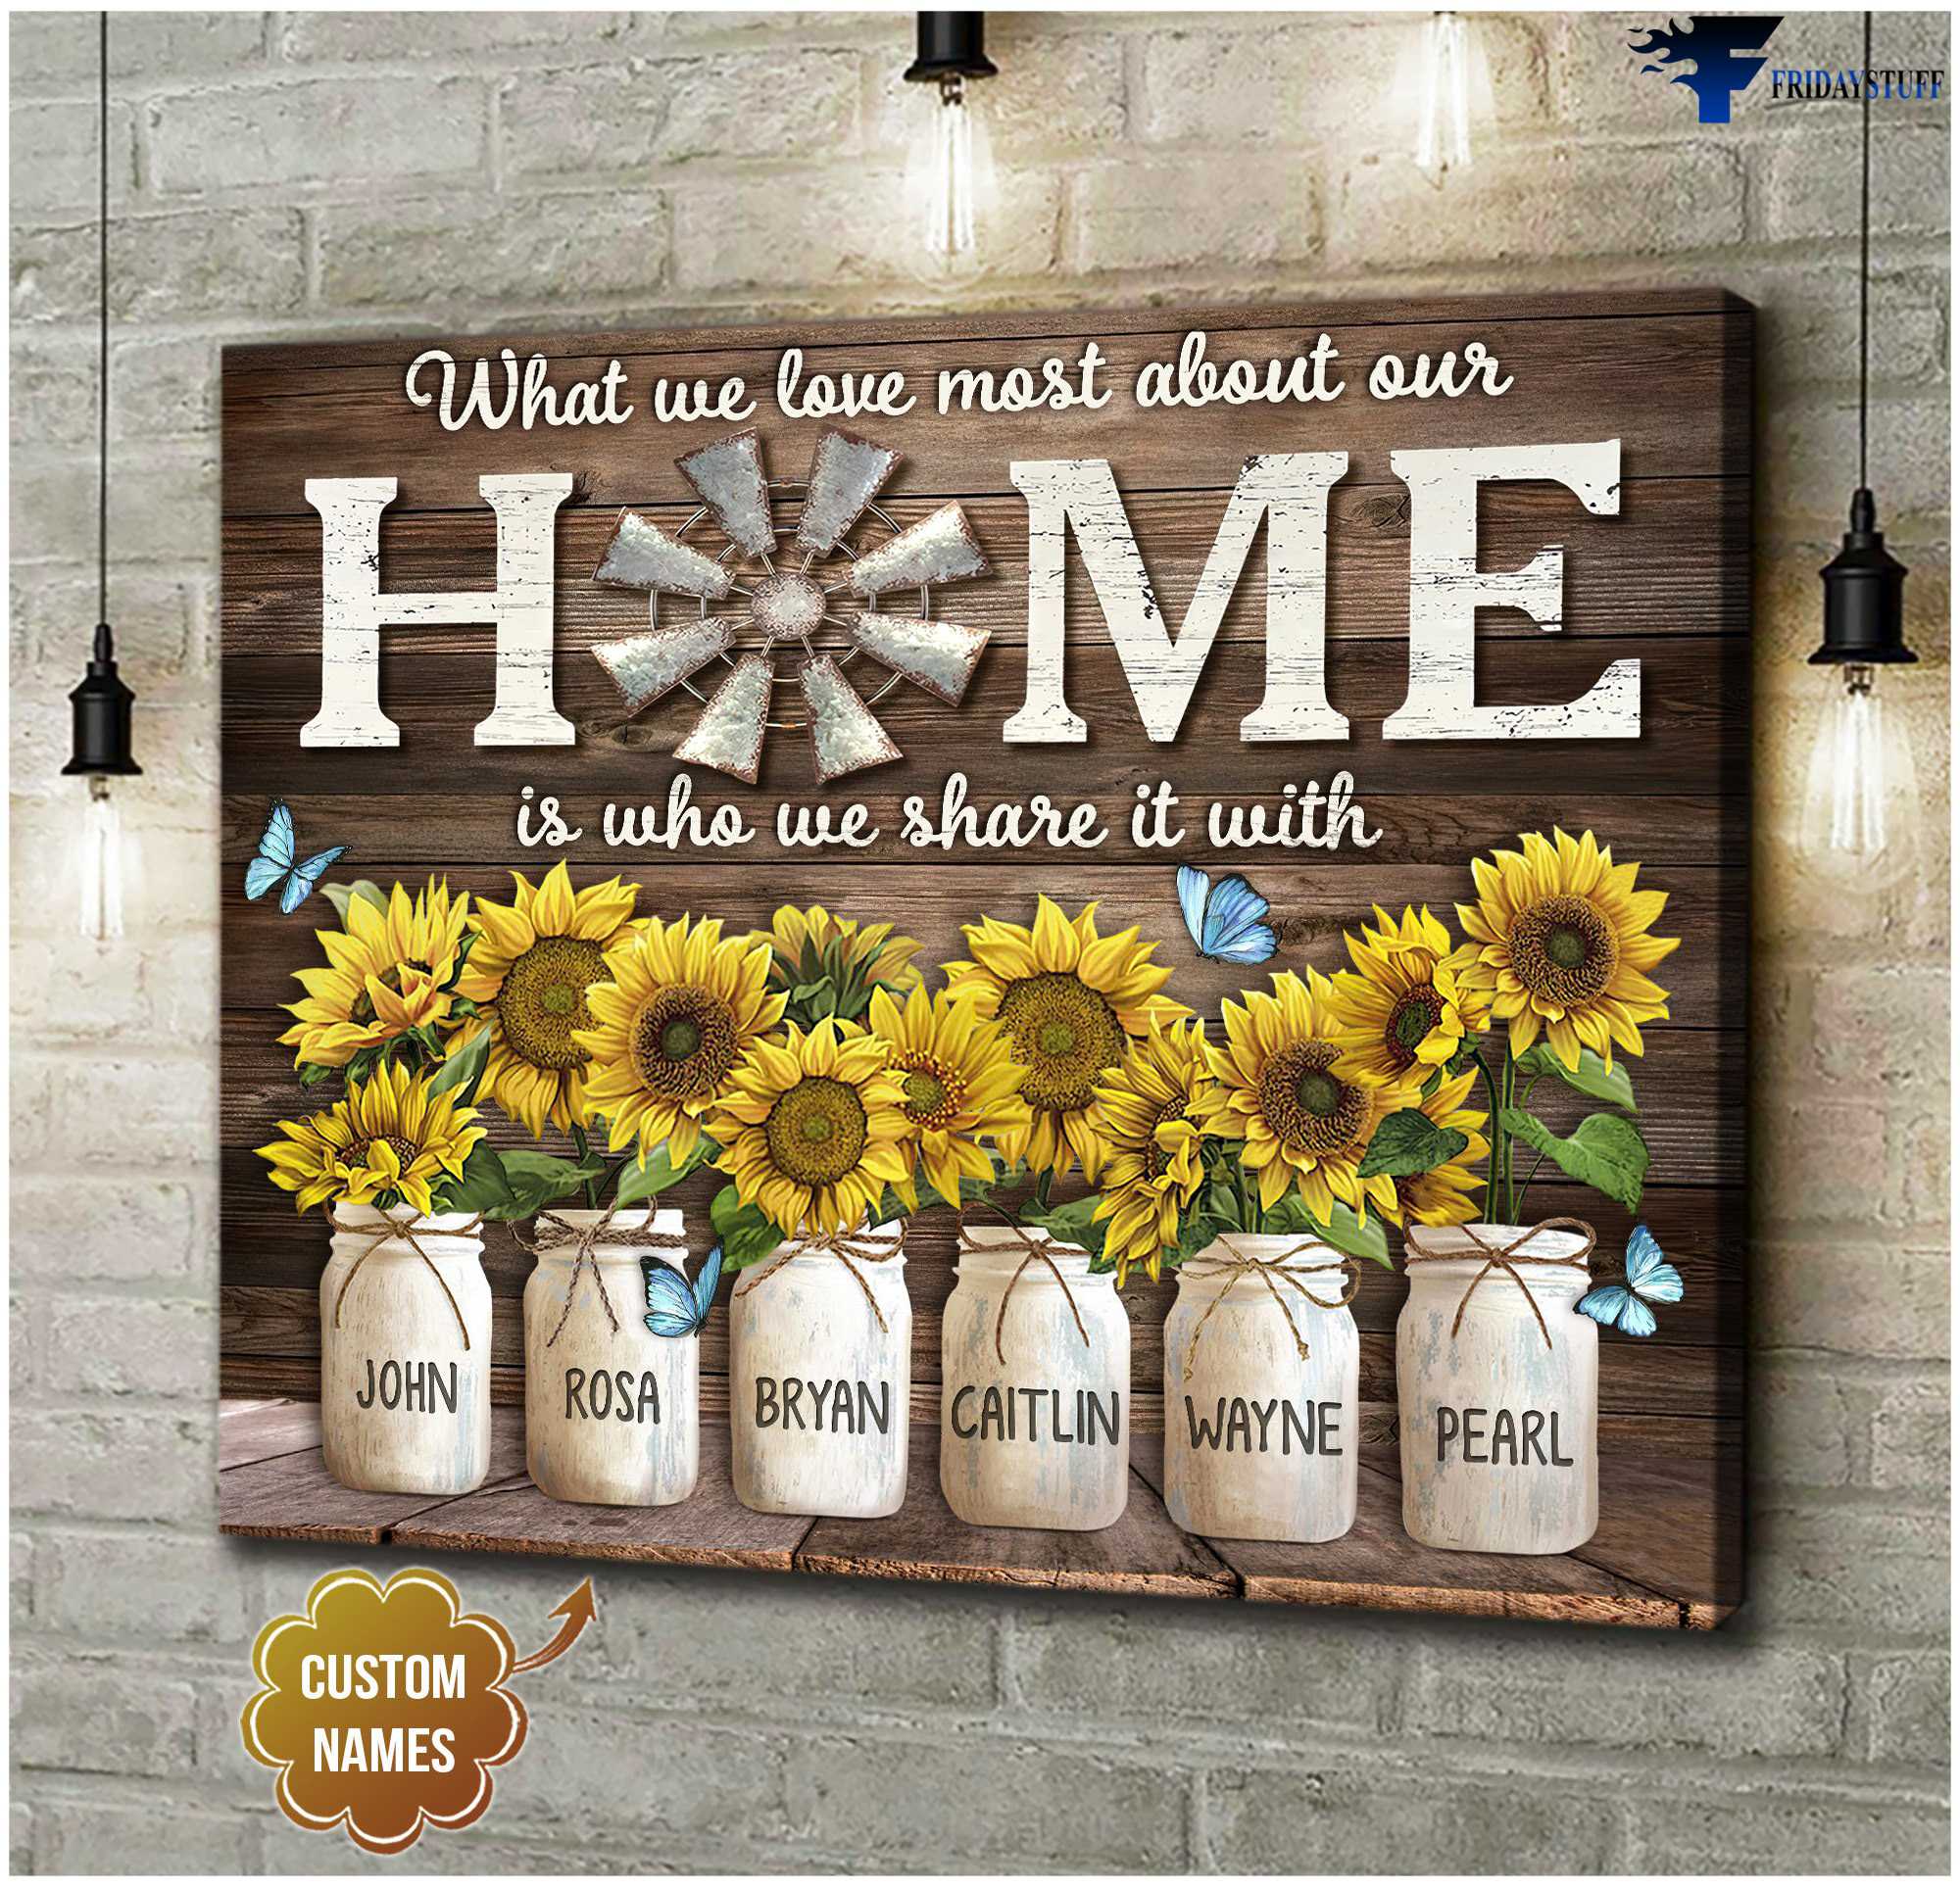 Family Poster, Sunflower Lover, What We Love Most About Our Home, Is Who We Share It With